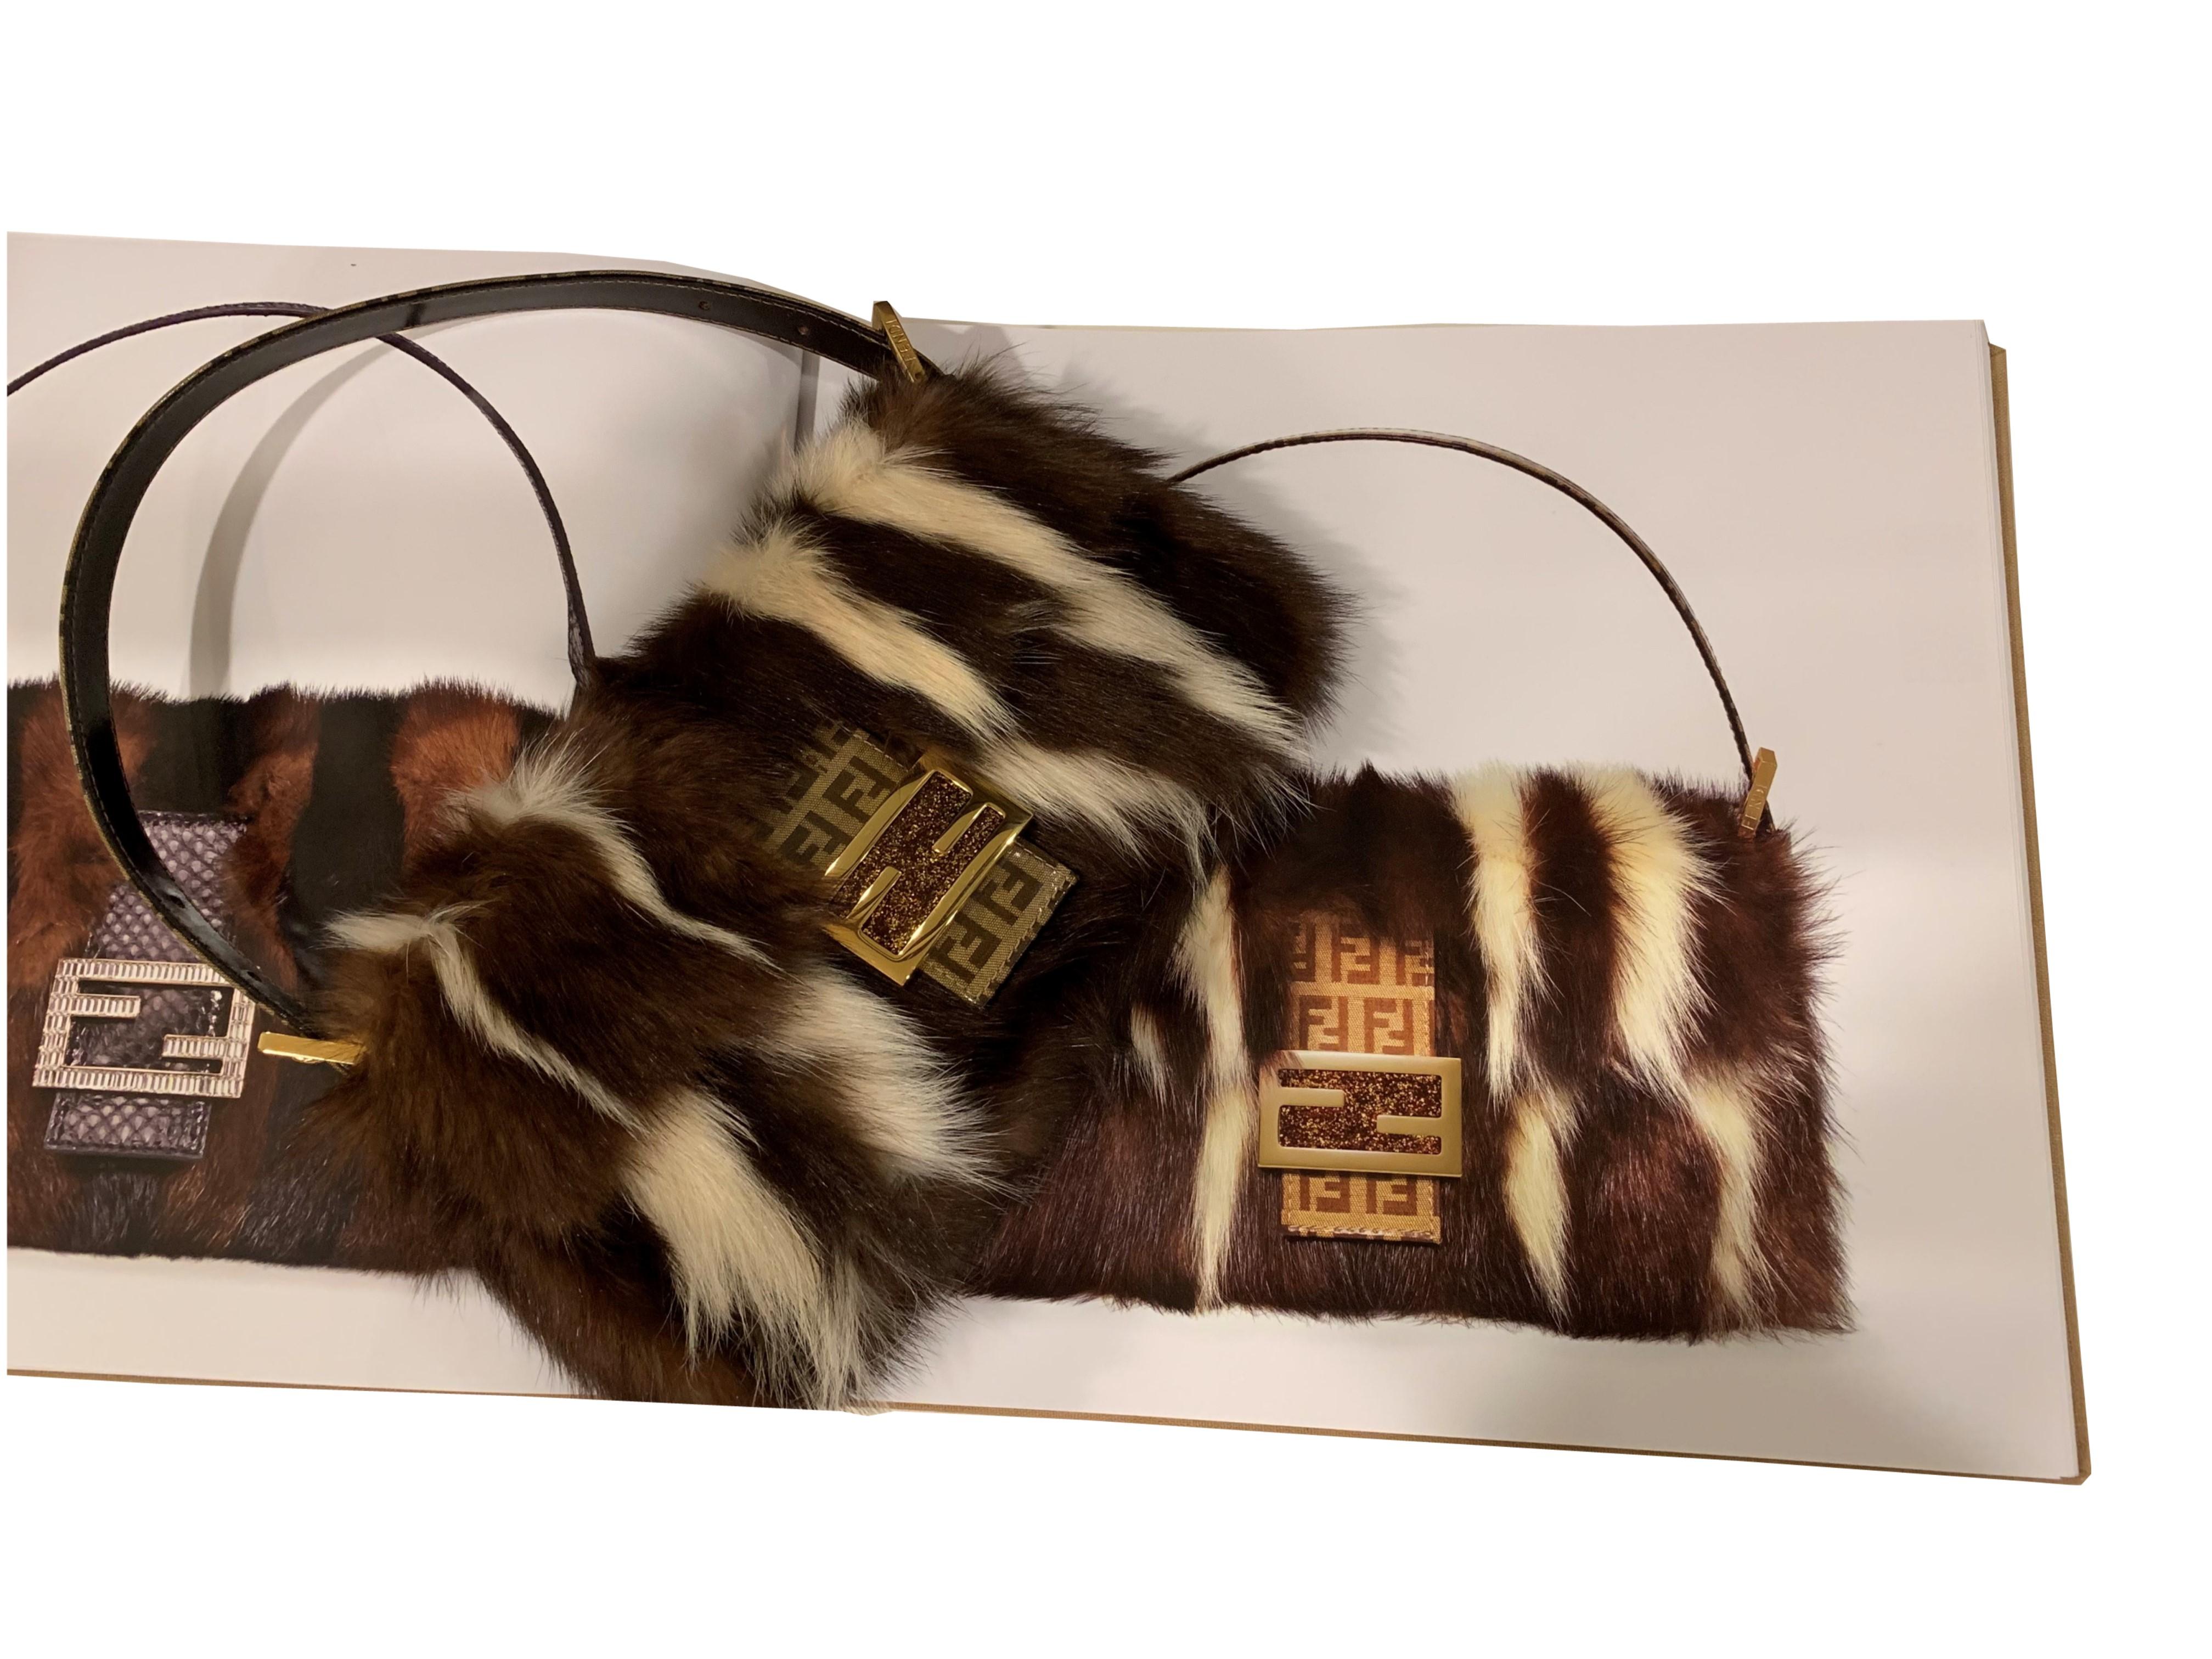 Fendi Fur Baguette
Featured in the Fendi 15th Anniversary Baguette Book
Brand New
* Rare Limited Edition Skunk Fur Baguette
* Brown and Cream Fur
* Gold Hardware
* Deep Purple Satin Lining
* One Interior Zippered Pocket
* Patent Covered Beige &